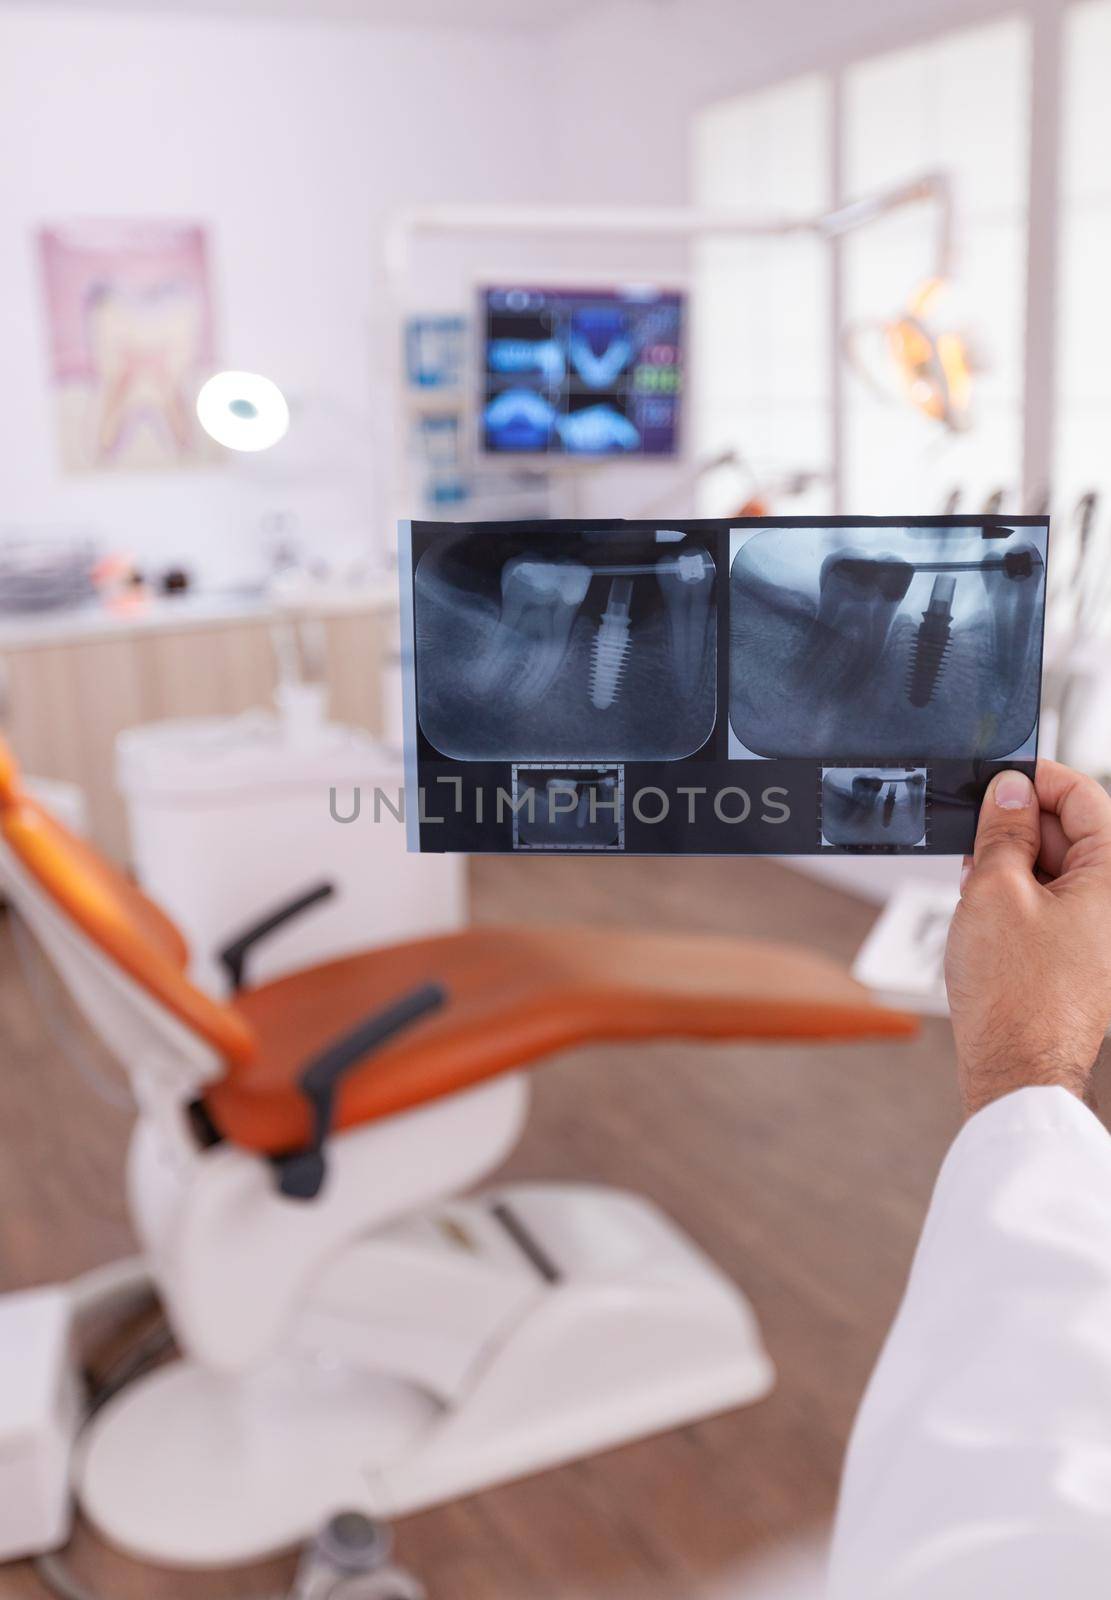 Orthodontist radiologist holding medical tooth radiography in hands analyzing dentistry surgery by DCStudio